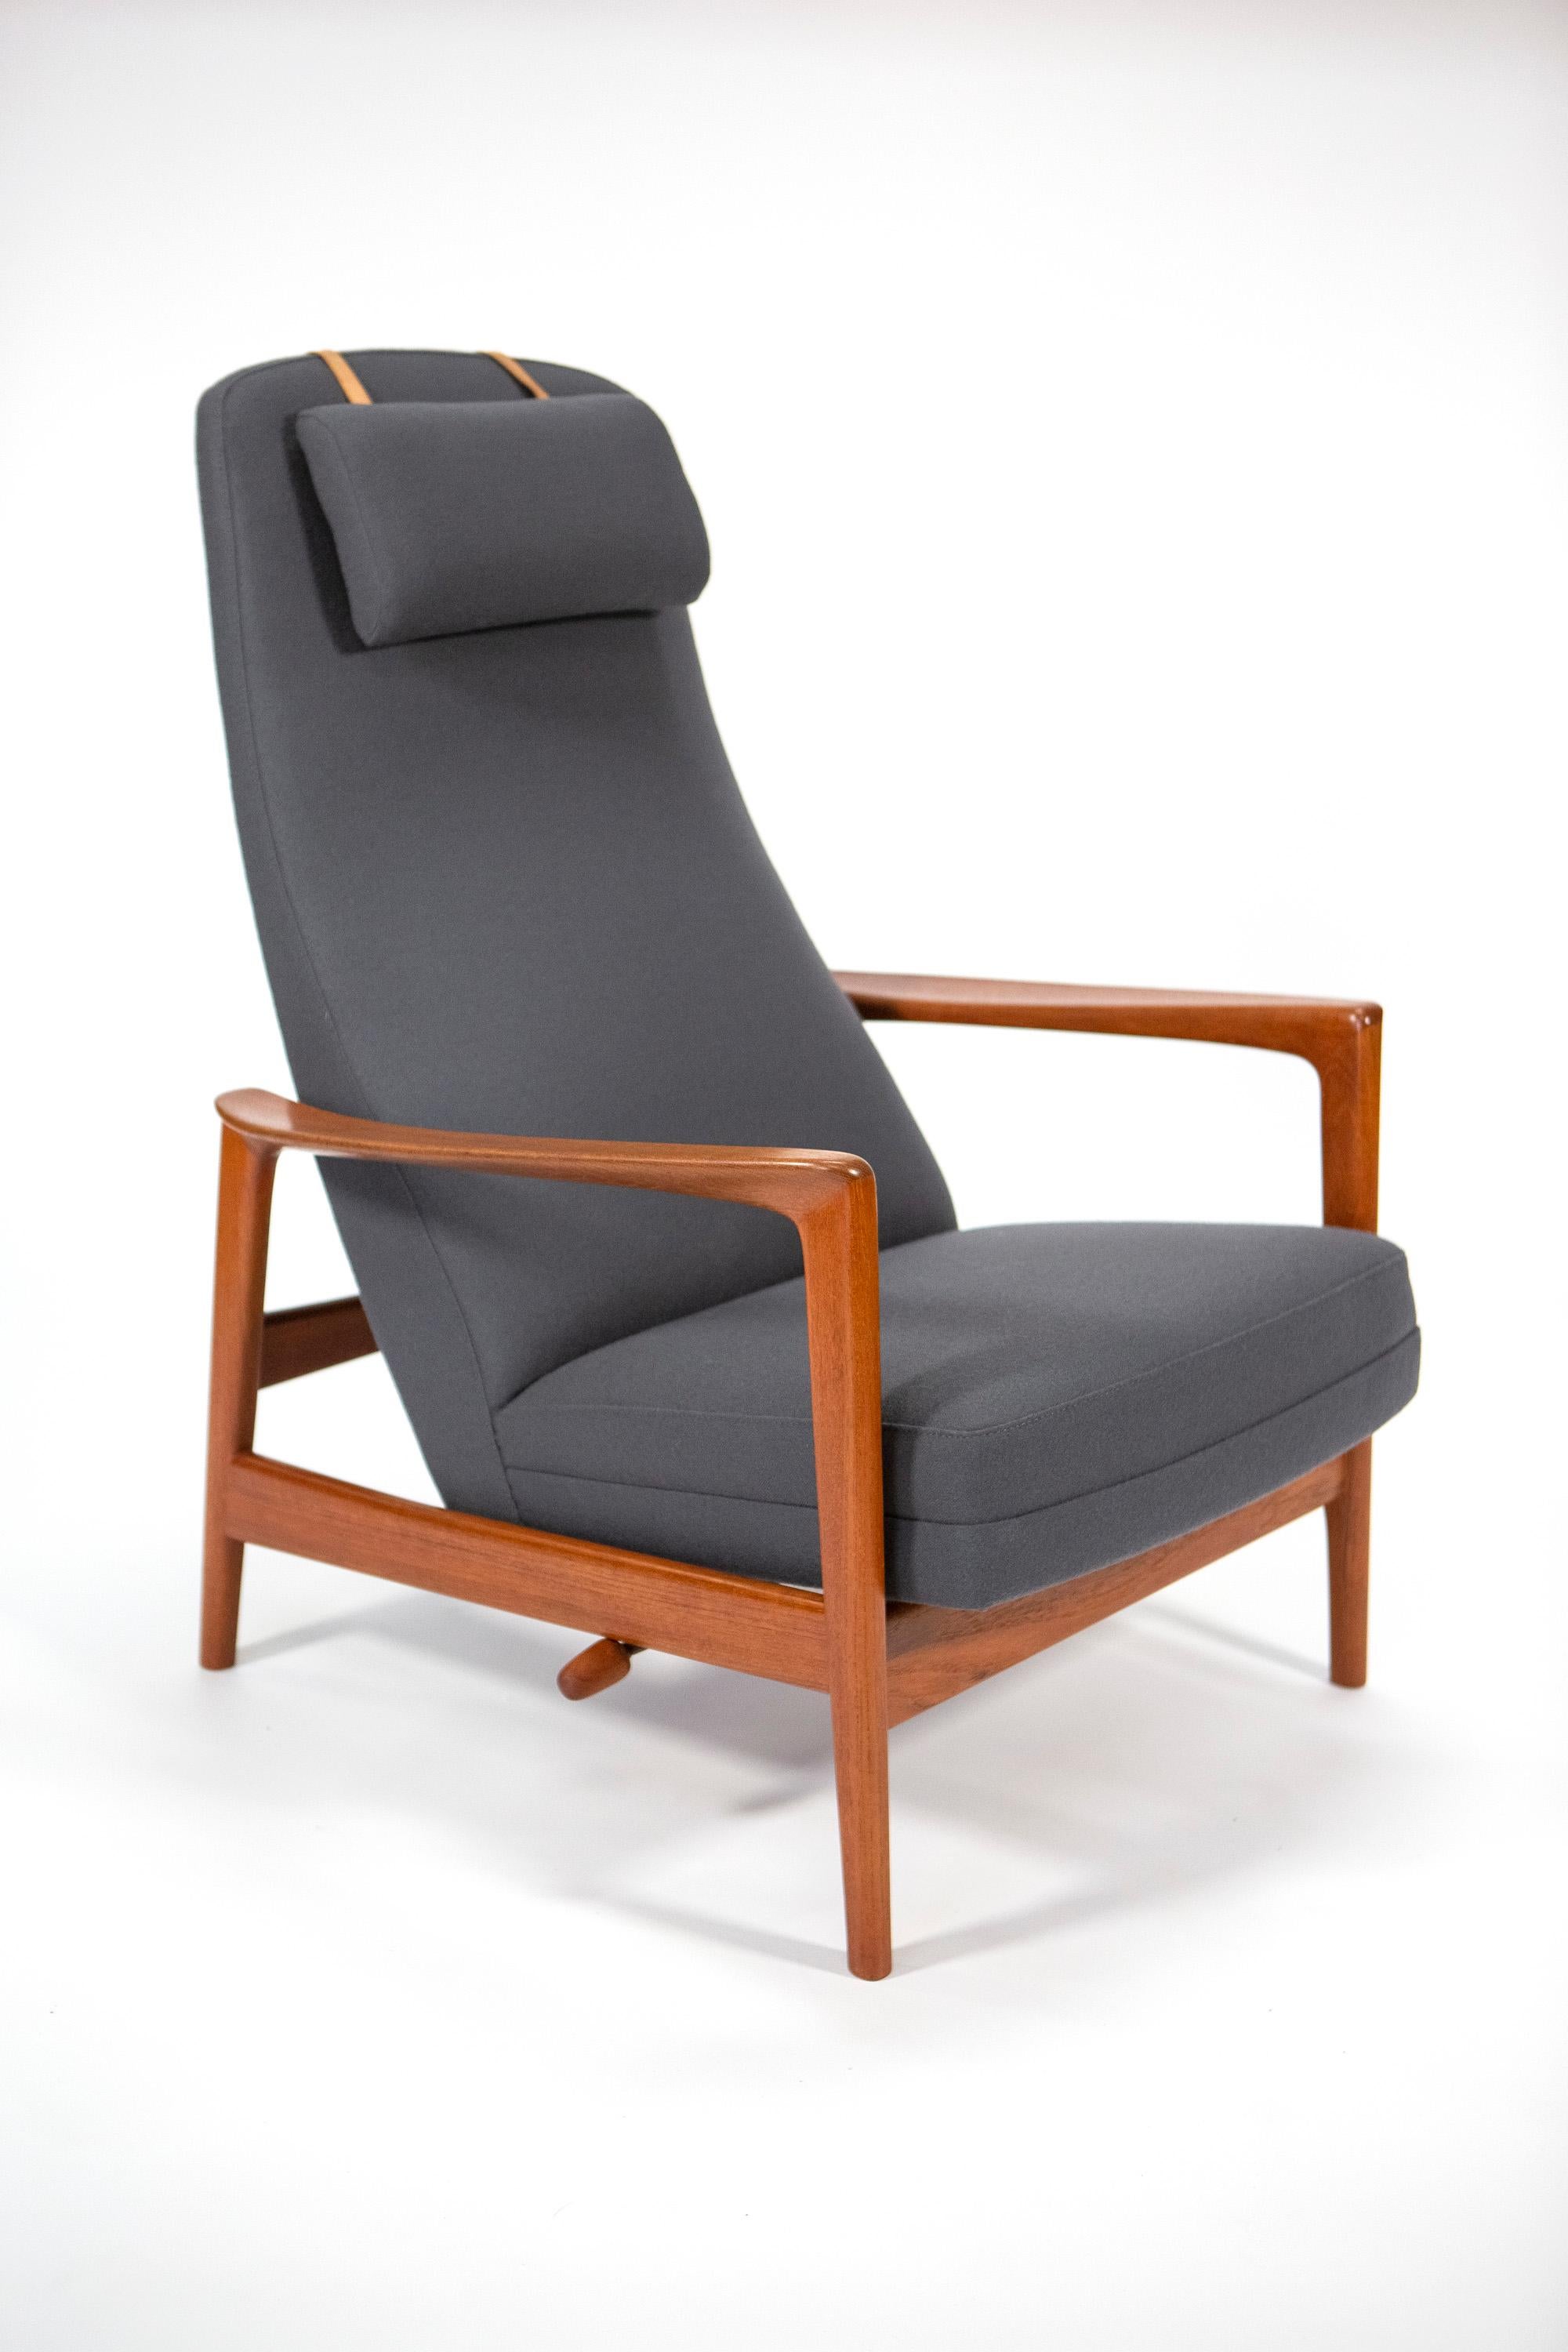 Folke Ohlsson teak 'Duxiesta' Adjustable Arm Chair by DUX - Sweden 1960's In Good Condition For Sale In Los Angeles, CA